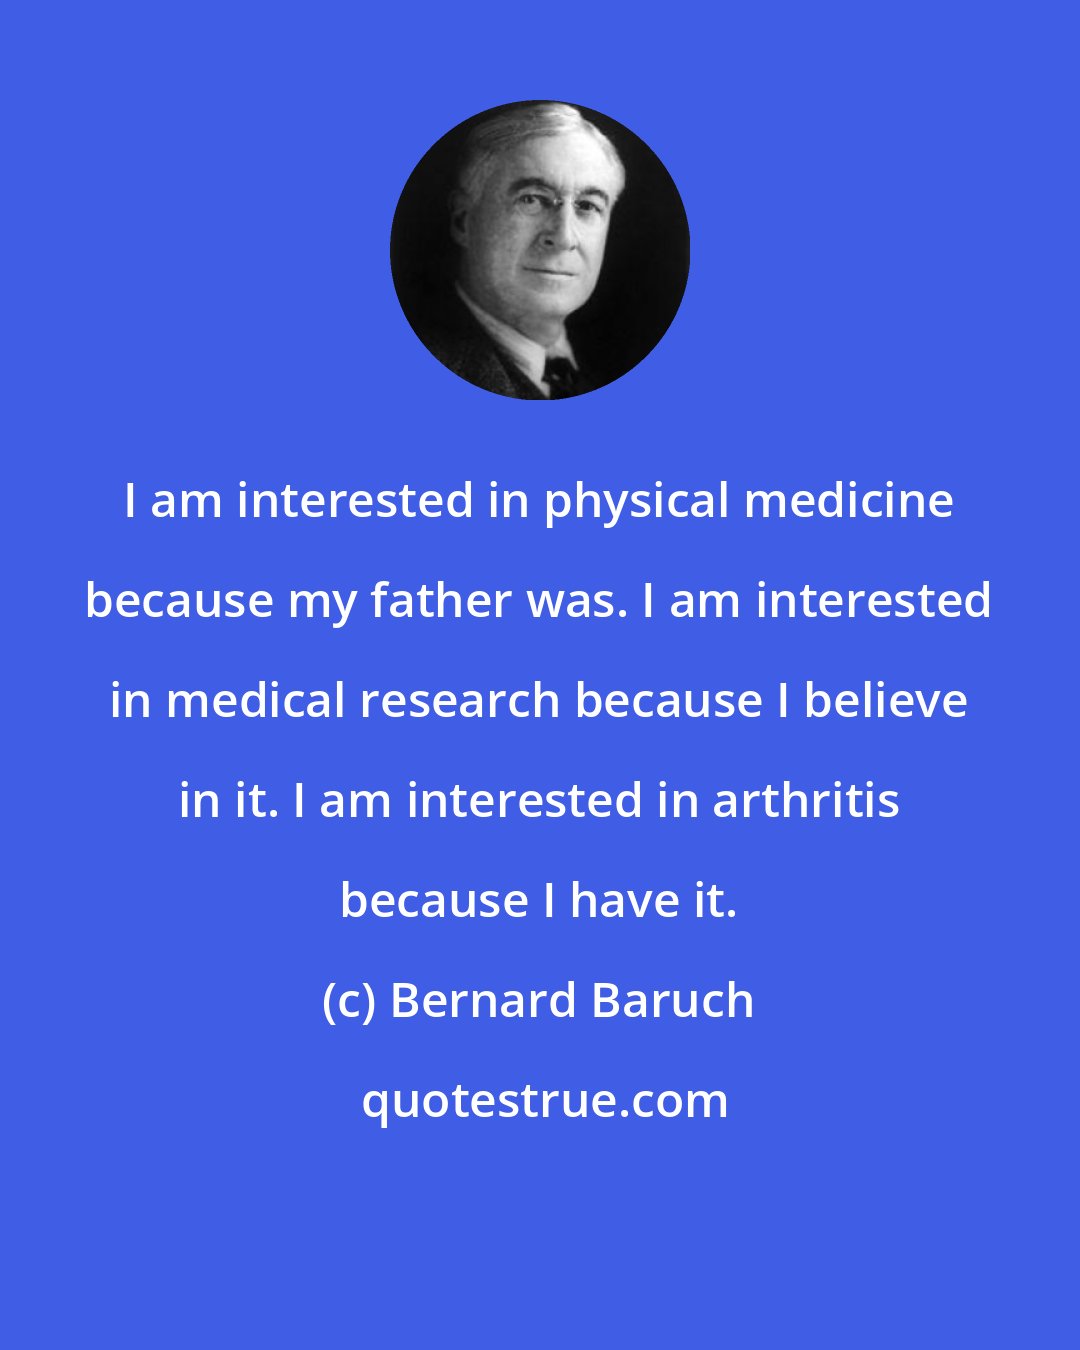 Bernard Baruch: I am interested in physical medicine because my father was. I am interested in medical research because I believe in it. I am interested in arthritis because I have it.